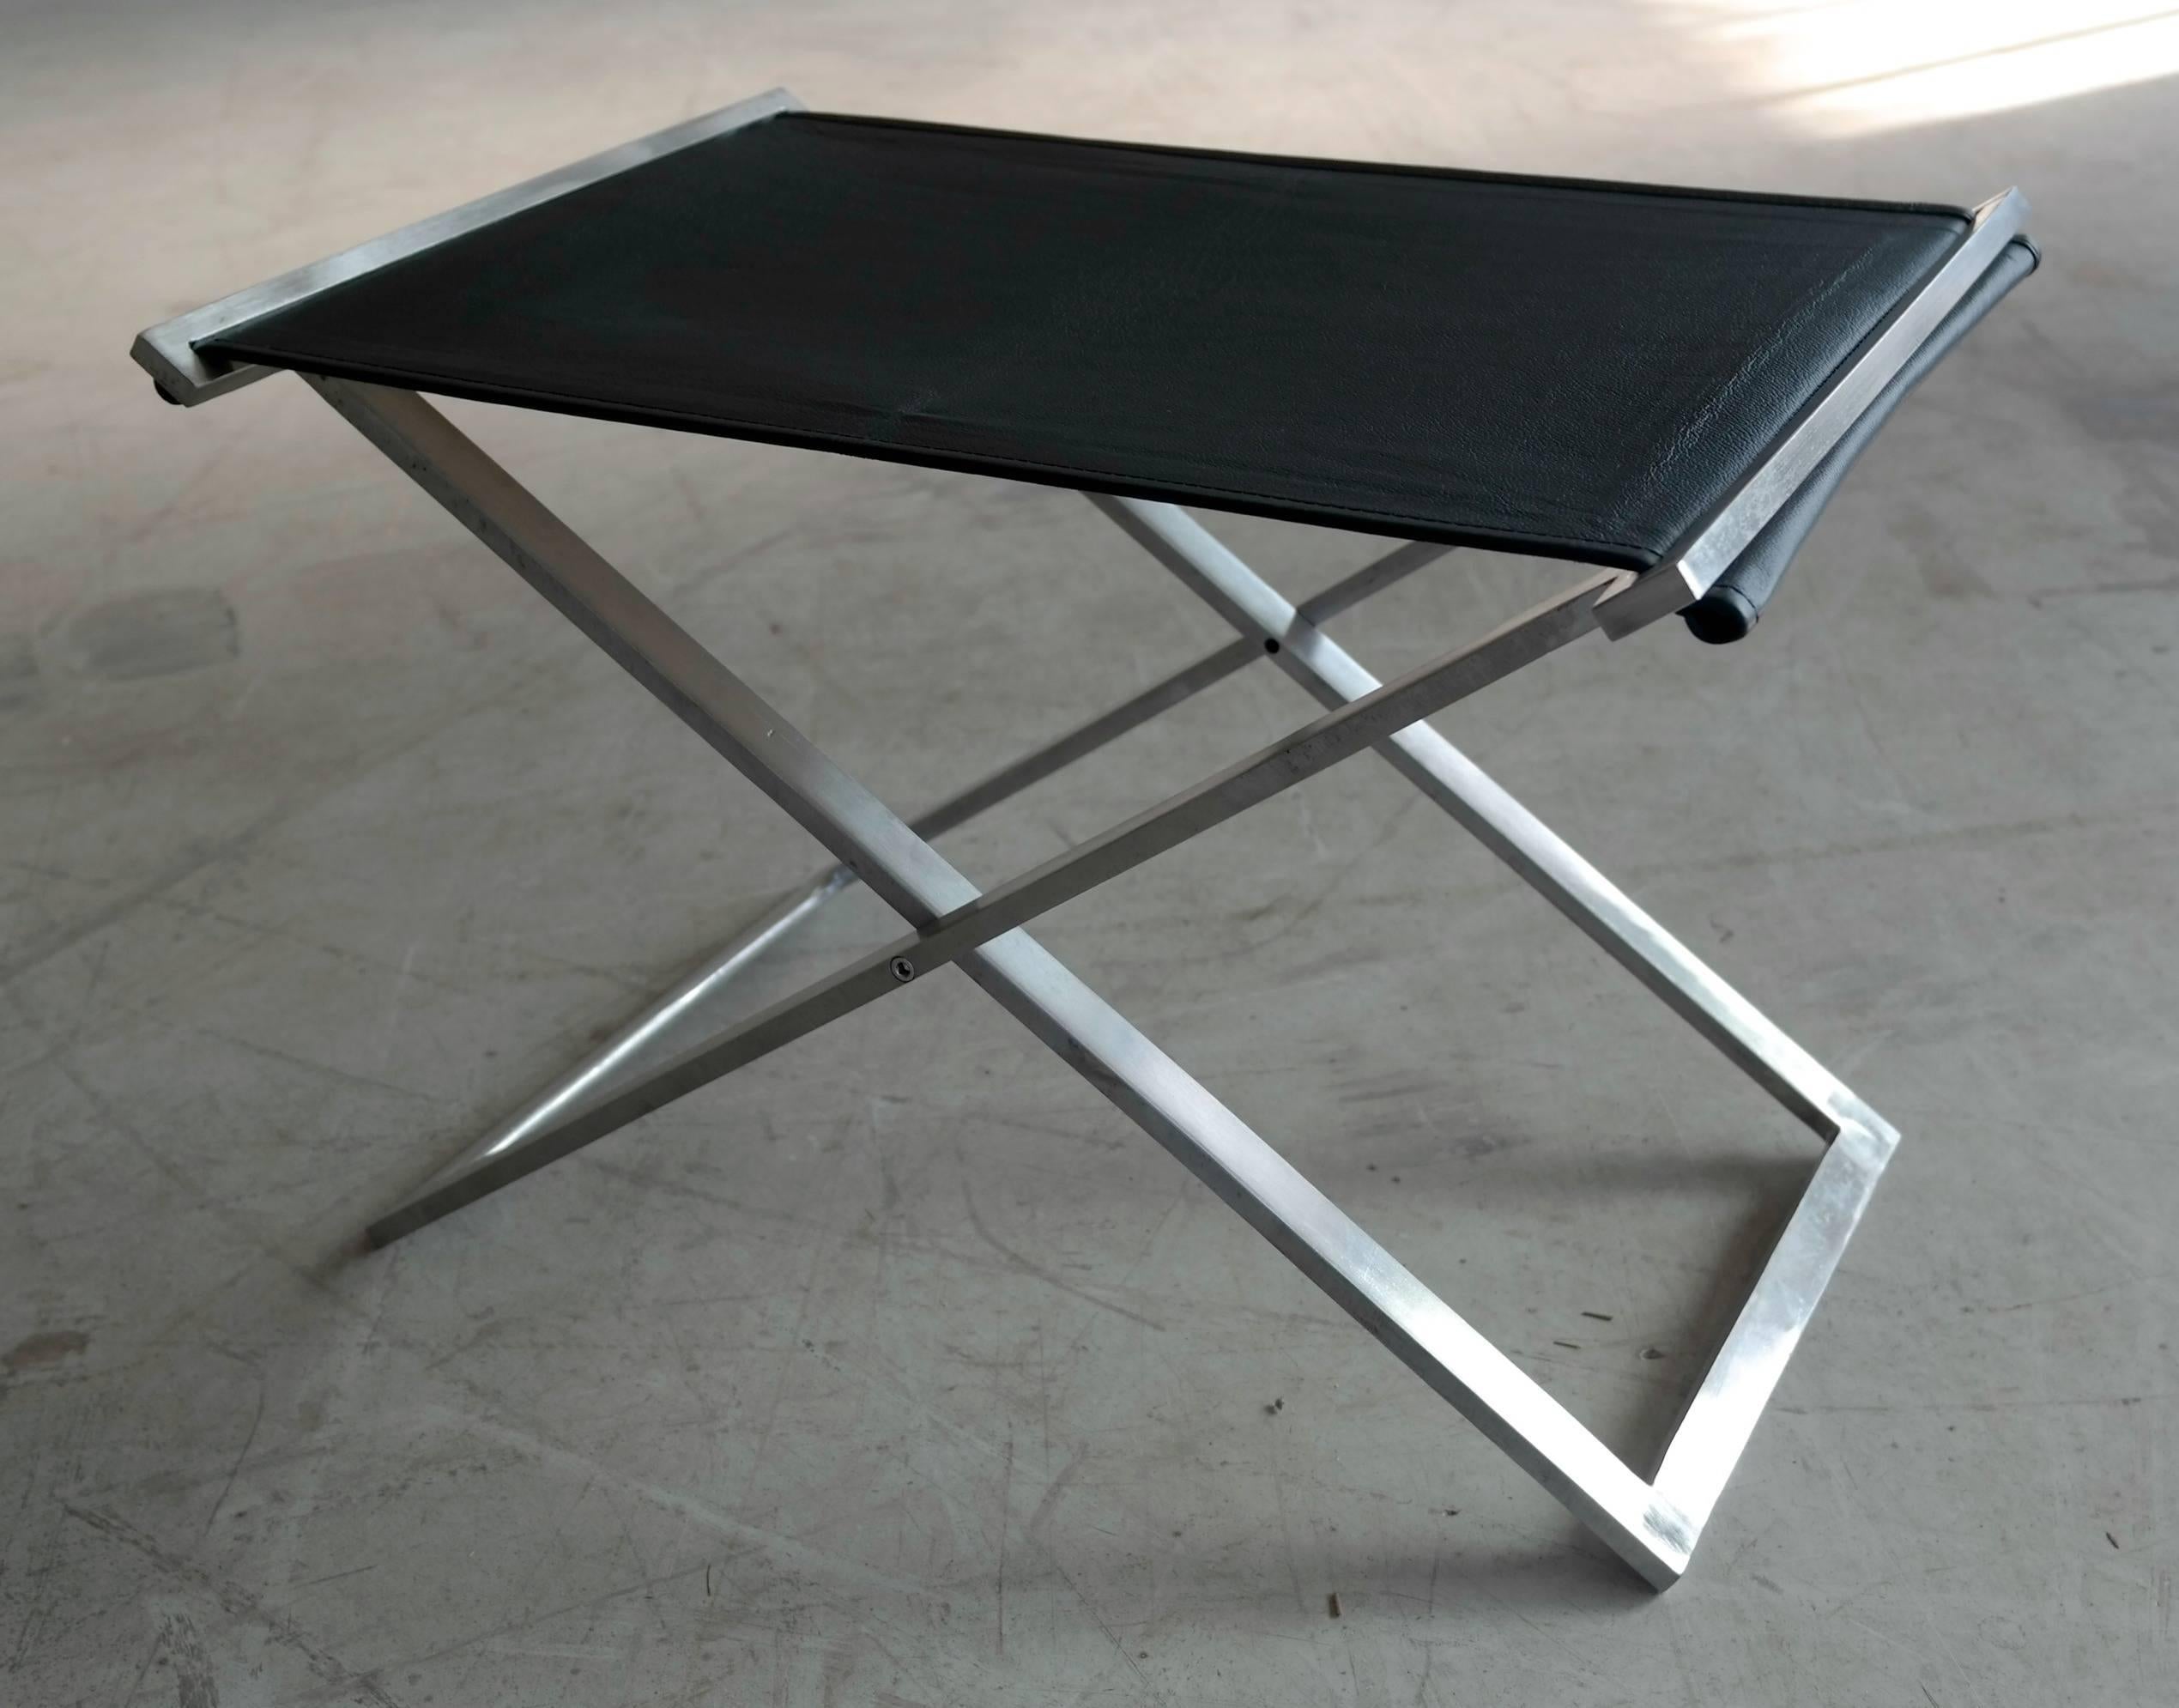 Ever thought a folding stool could be cool? Folding stool model rough#1 by Michael Christensen, Denmark. Made from 10mm hand-wrought flat steel frame. Seat fitted with black aniline leather with pale canvas supportive material. Very sturdy and well